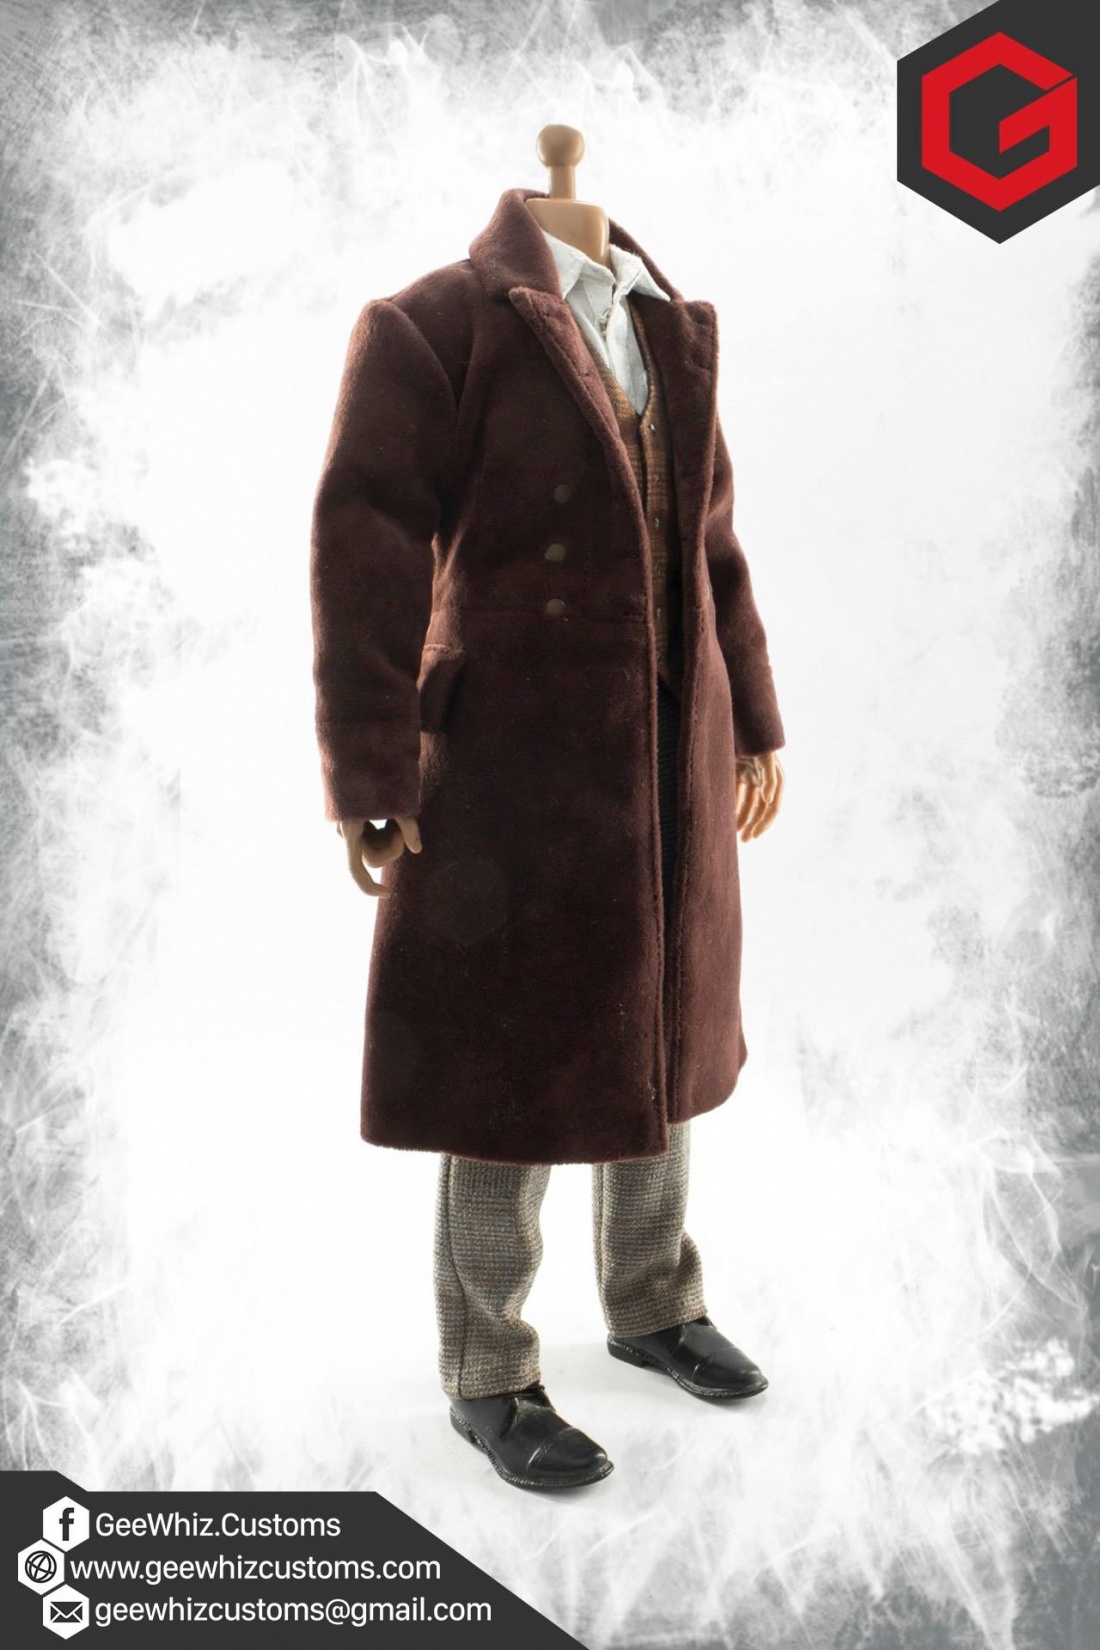 Geewhiz Customs: The Fourth Doctor